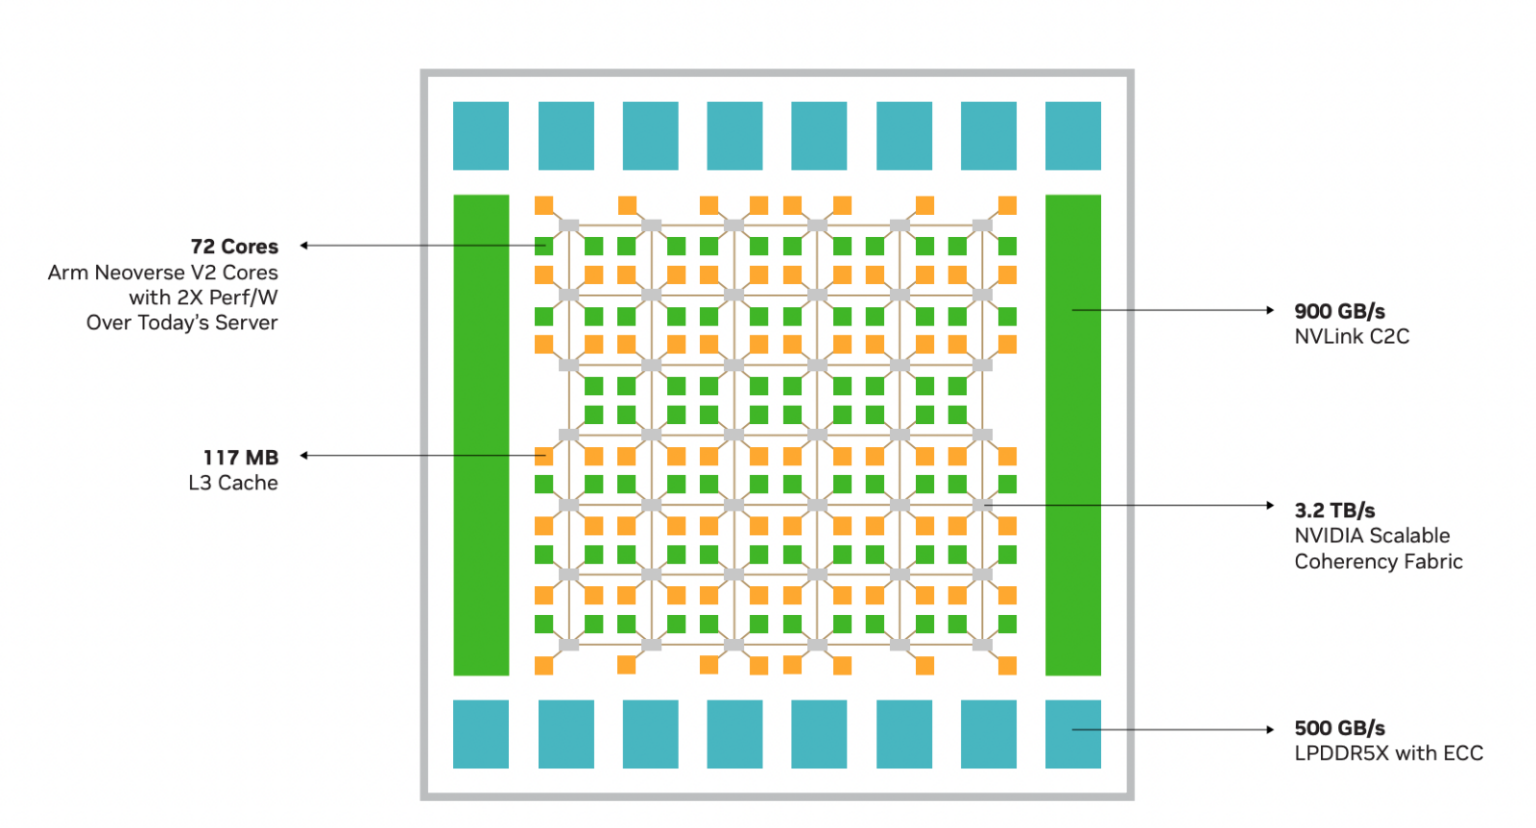 grace-cpu-layout-scalable-coherency-fabric-1536x828.png